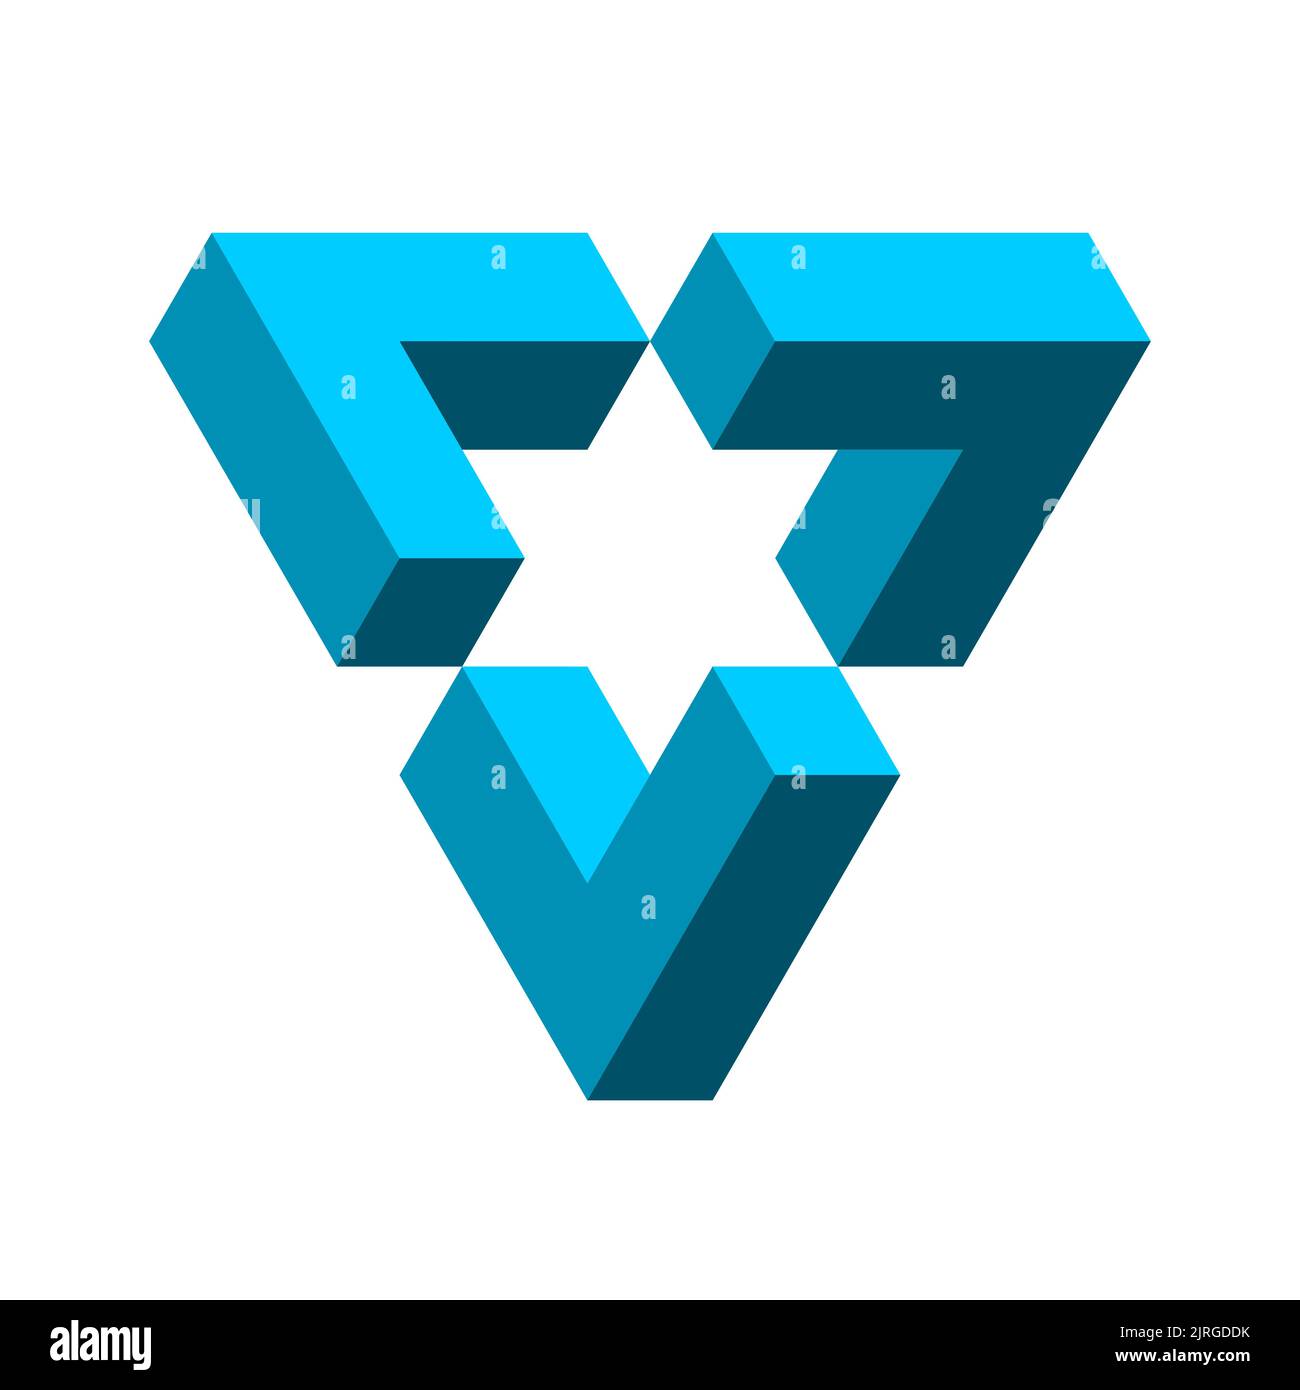 Impossible blue triangle. Penrose shape. Esher geometric object. Optical illusion visual effect. Logo template made of three symmetric parts. Vector Stock Vector